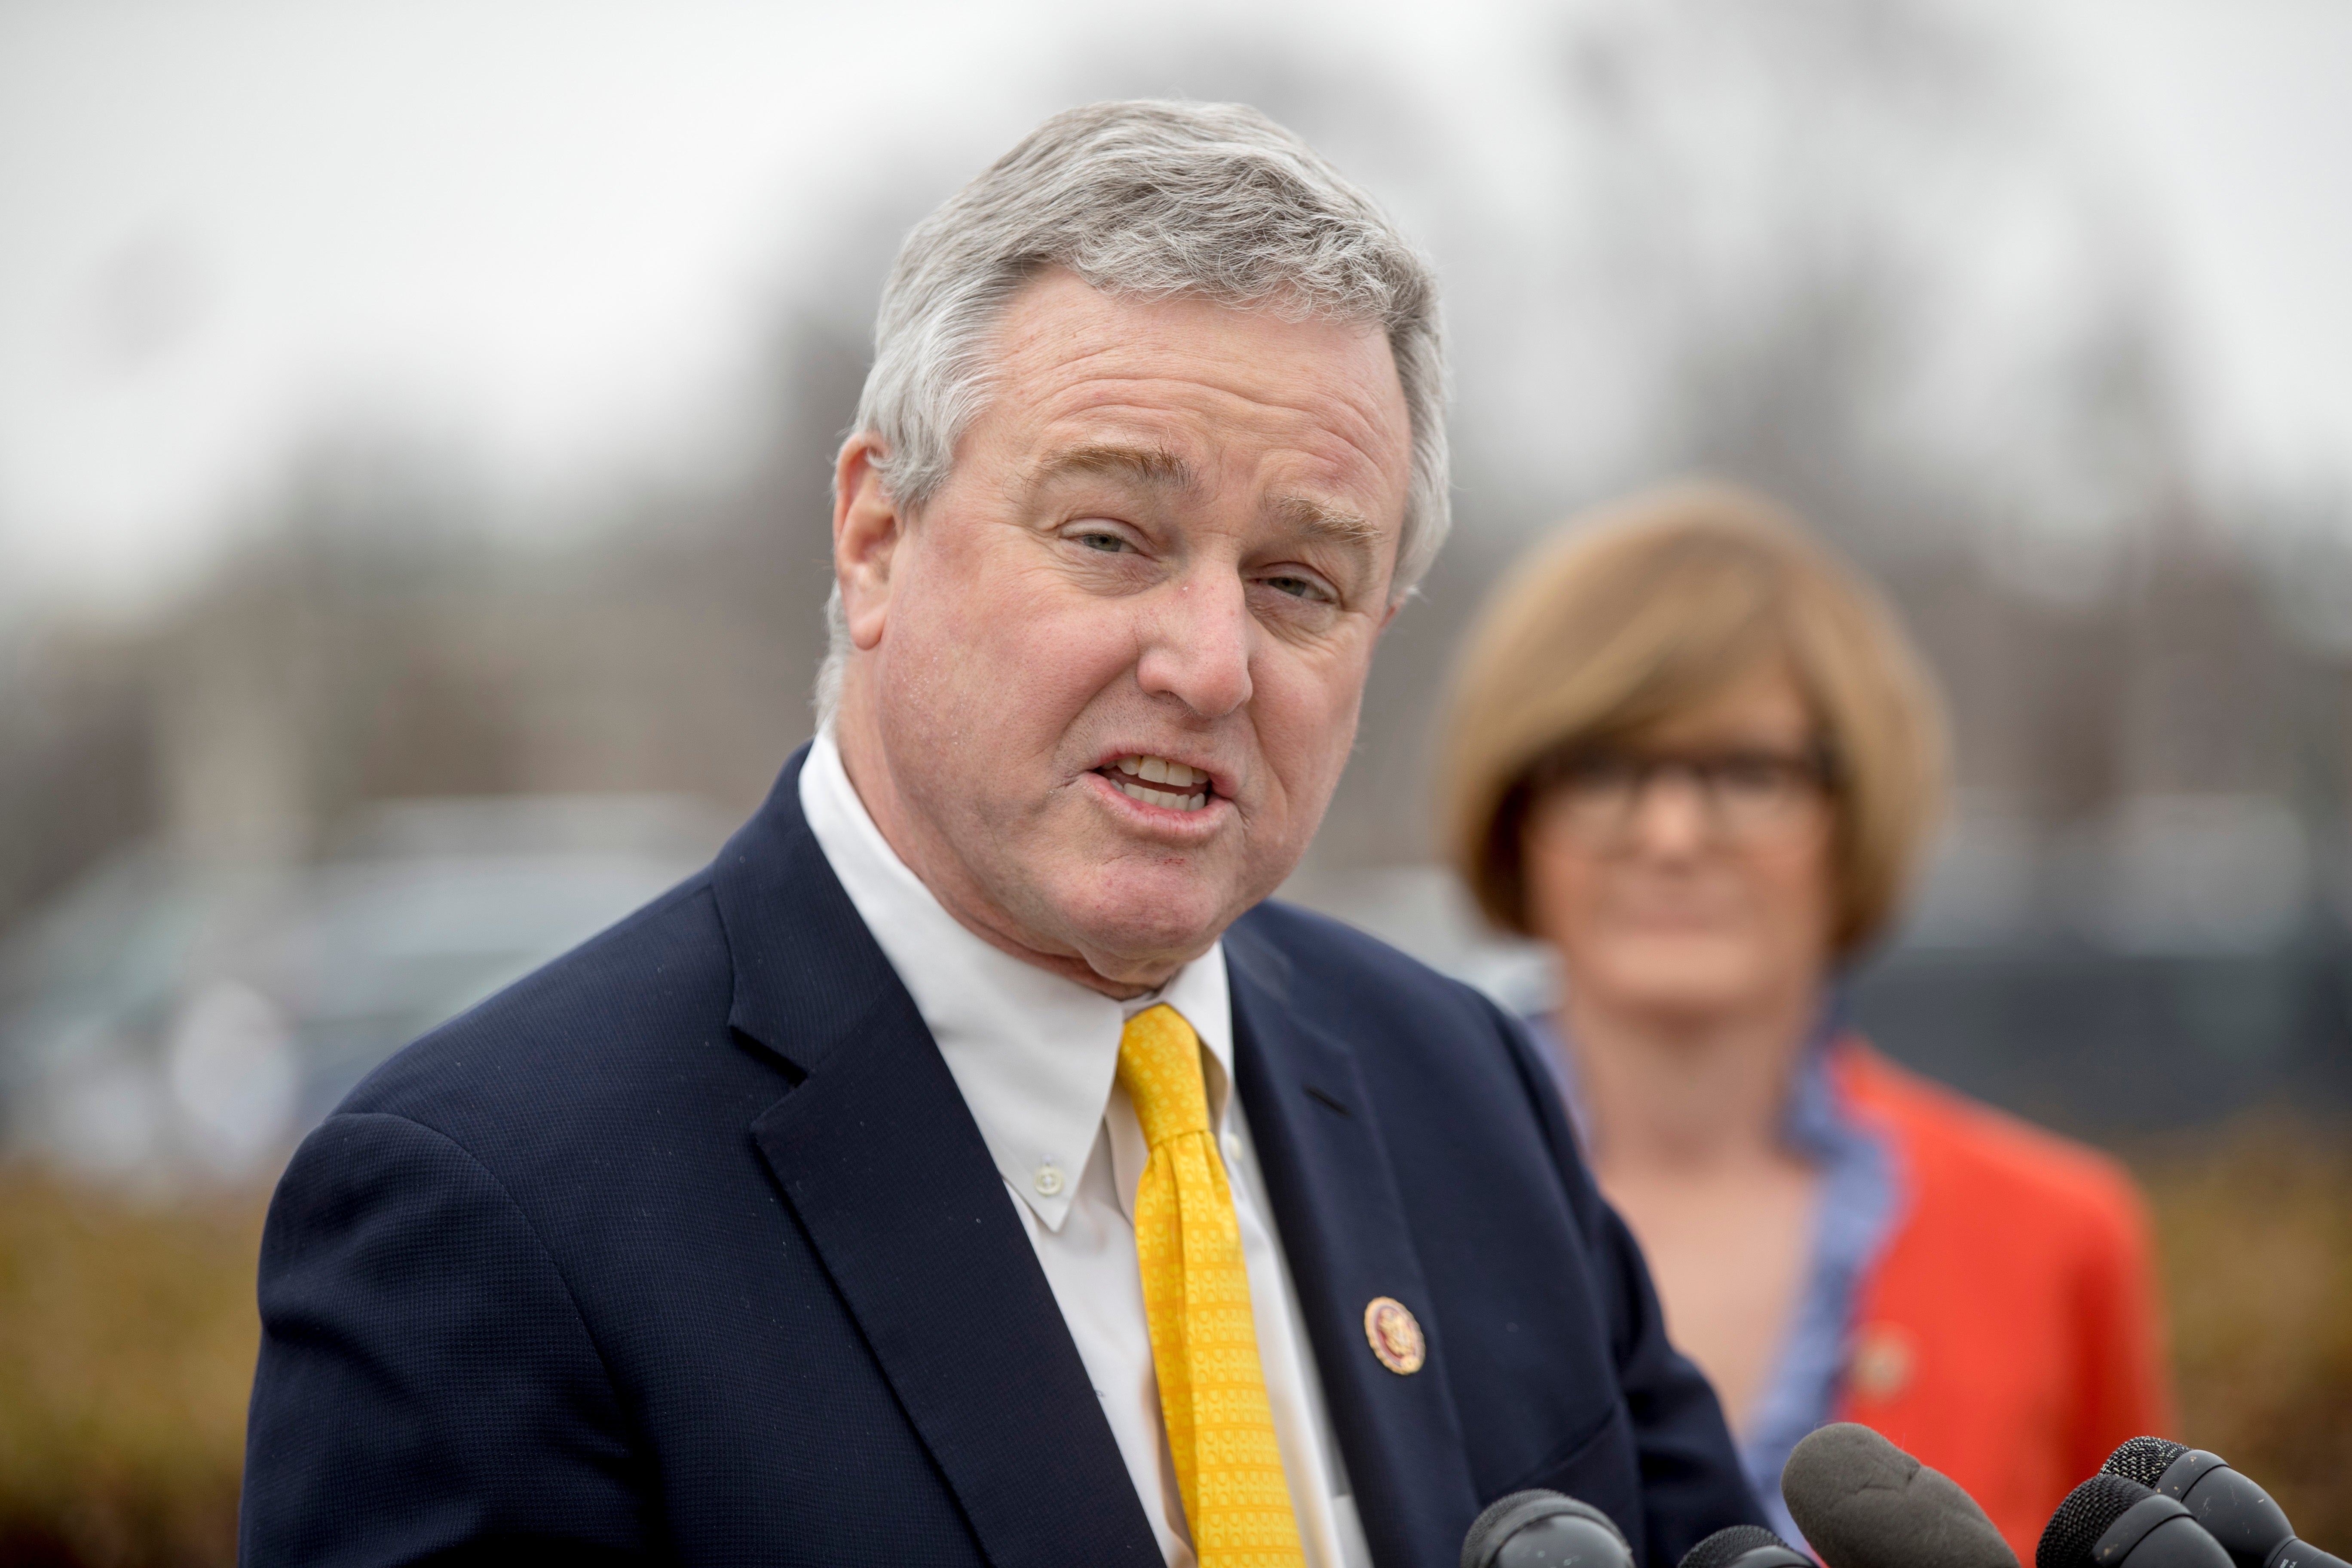 David Trone speaks at a press conference on Capitol Hill in 2019